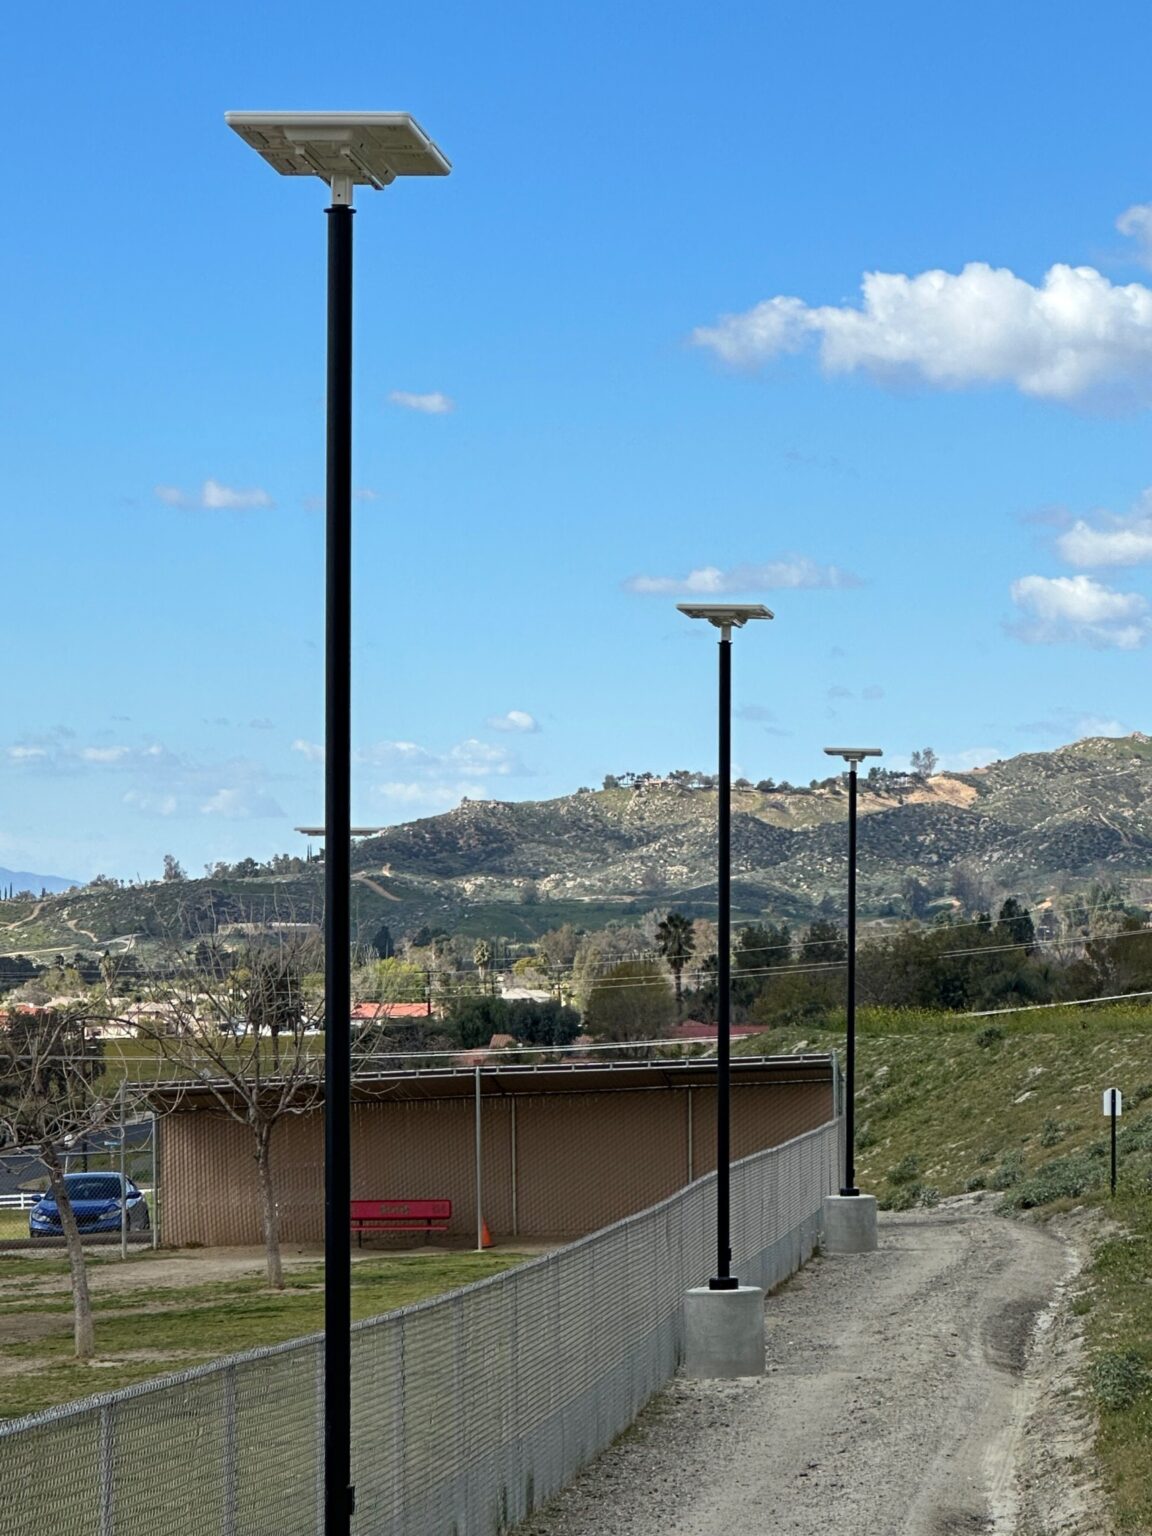 Three of Sol's iSSL solar lights lining a fence at a dog park in California with a covered shade area, parked car, and hills against a clear sky in the background